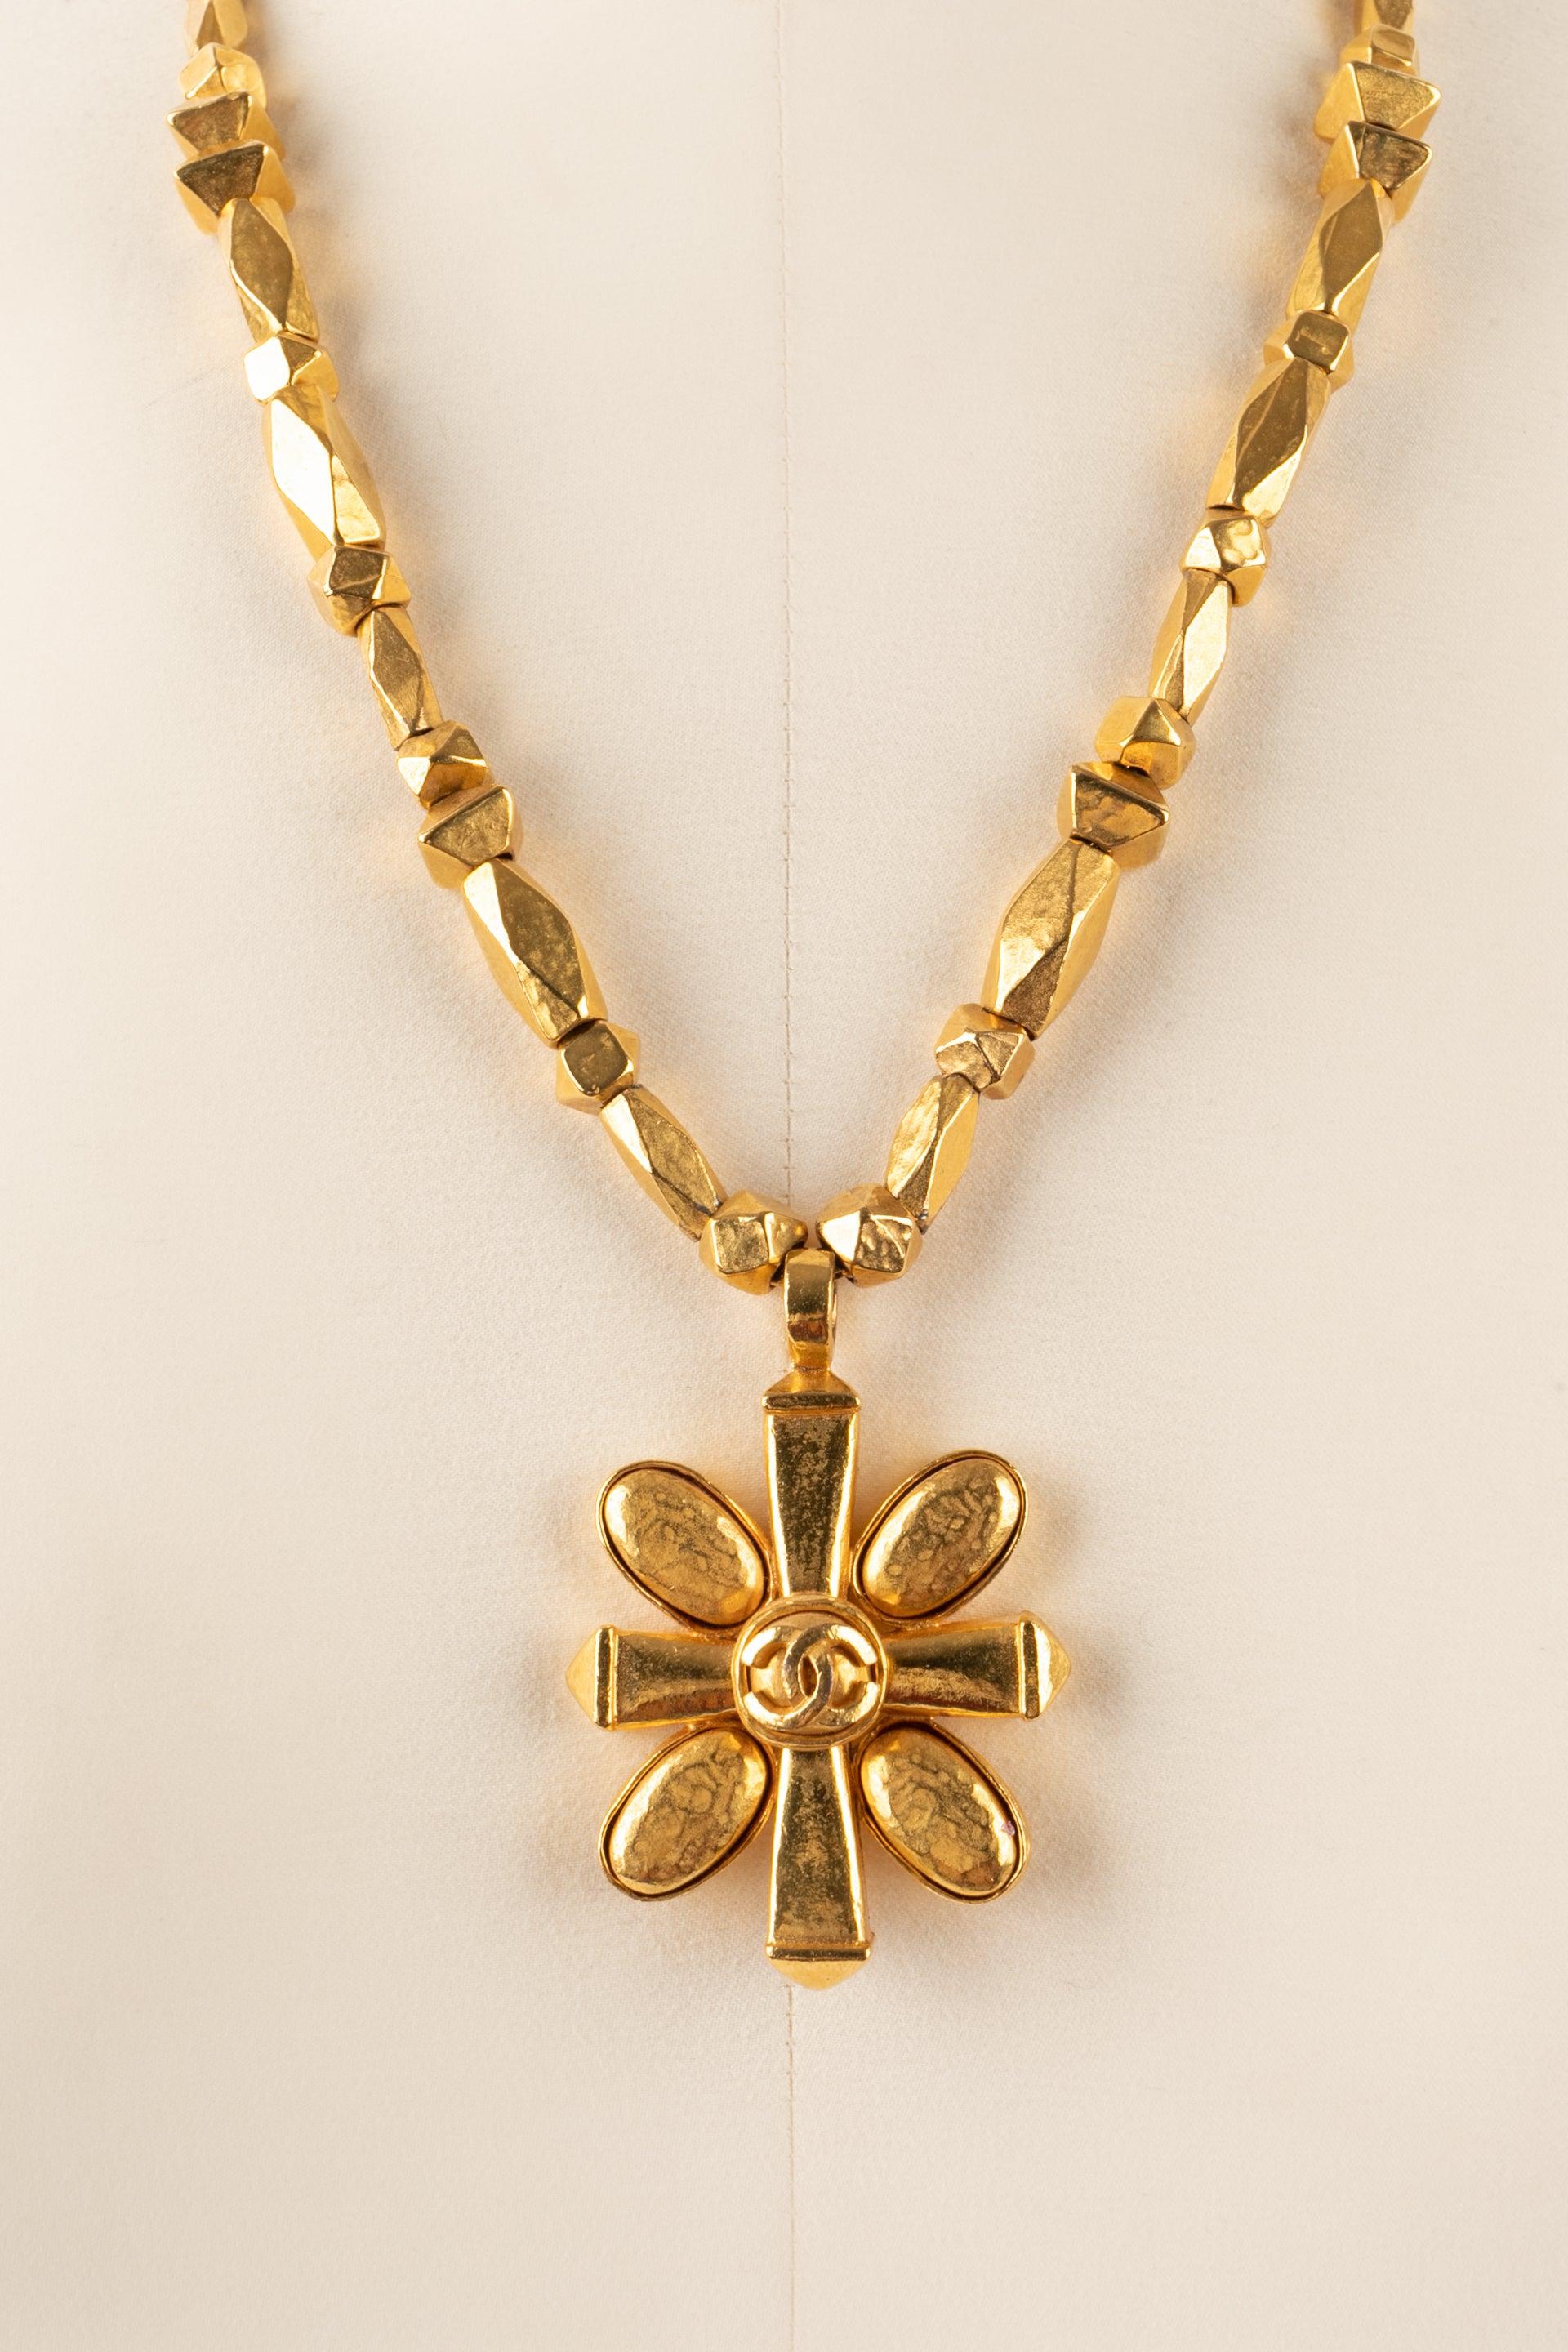 Women's Chanel Golden Metal Necklace with Cross Pendant, Fall 1997 For Sale